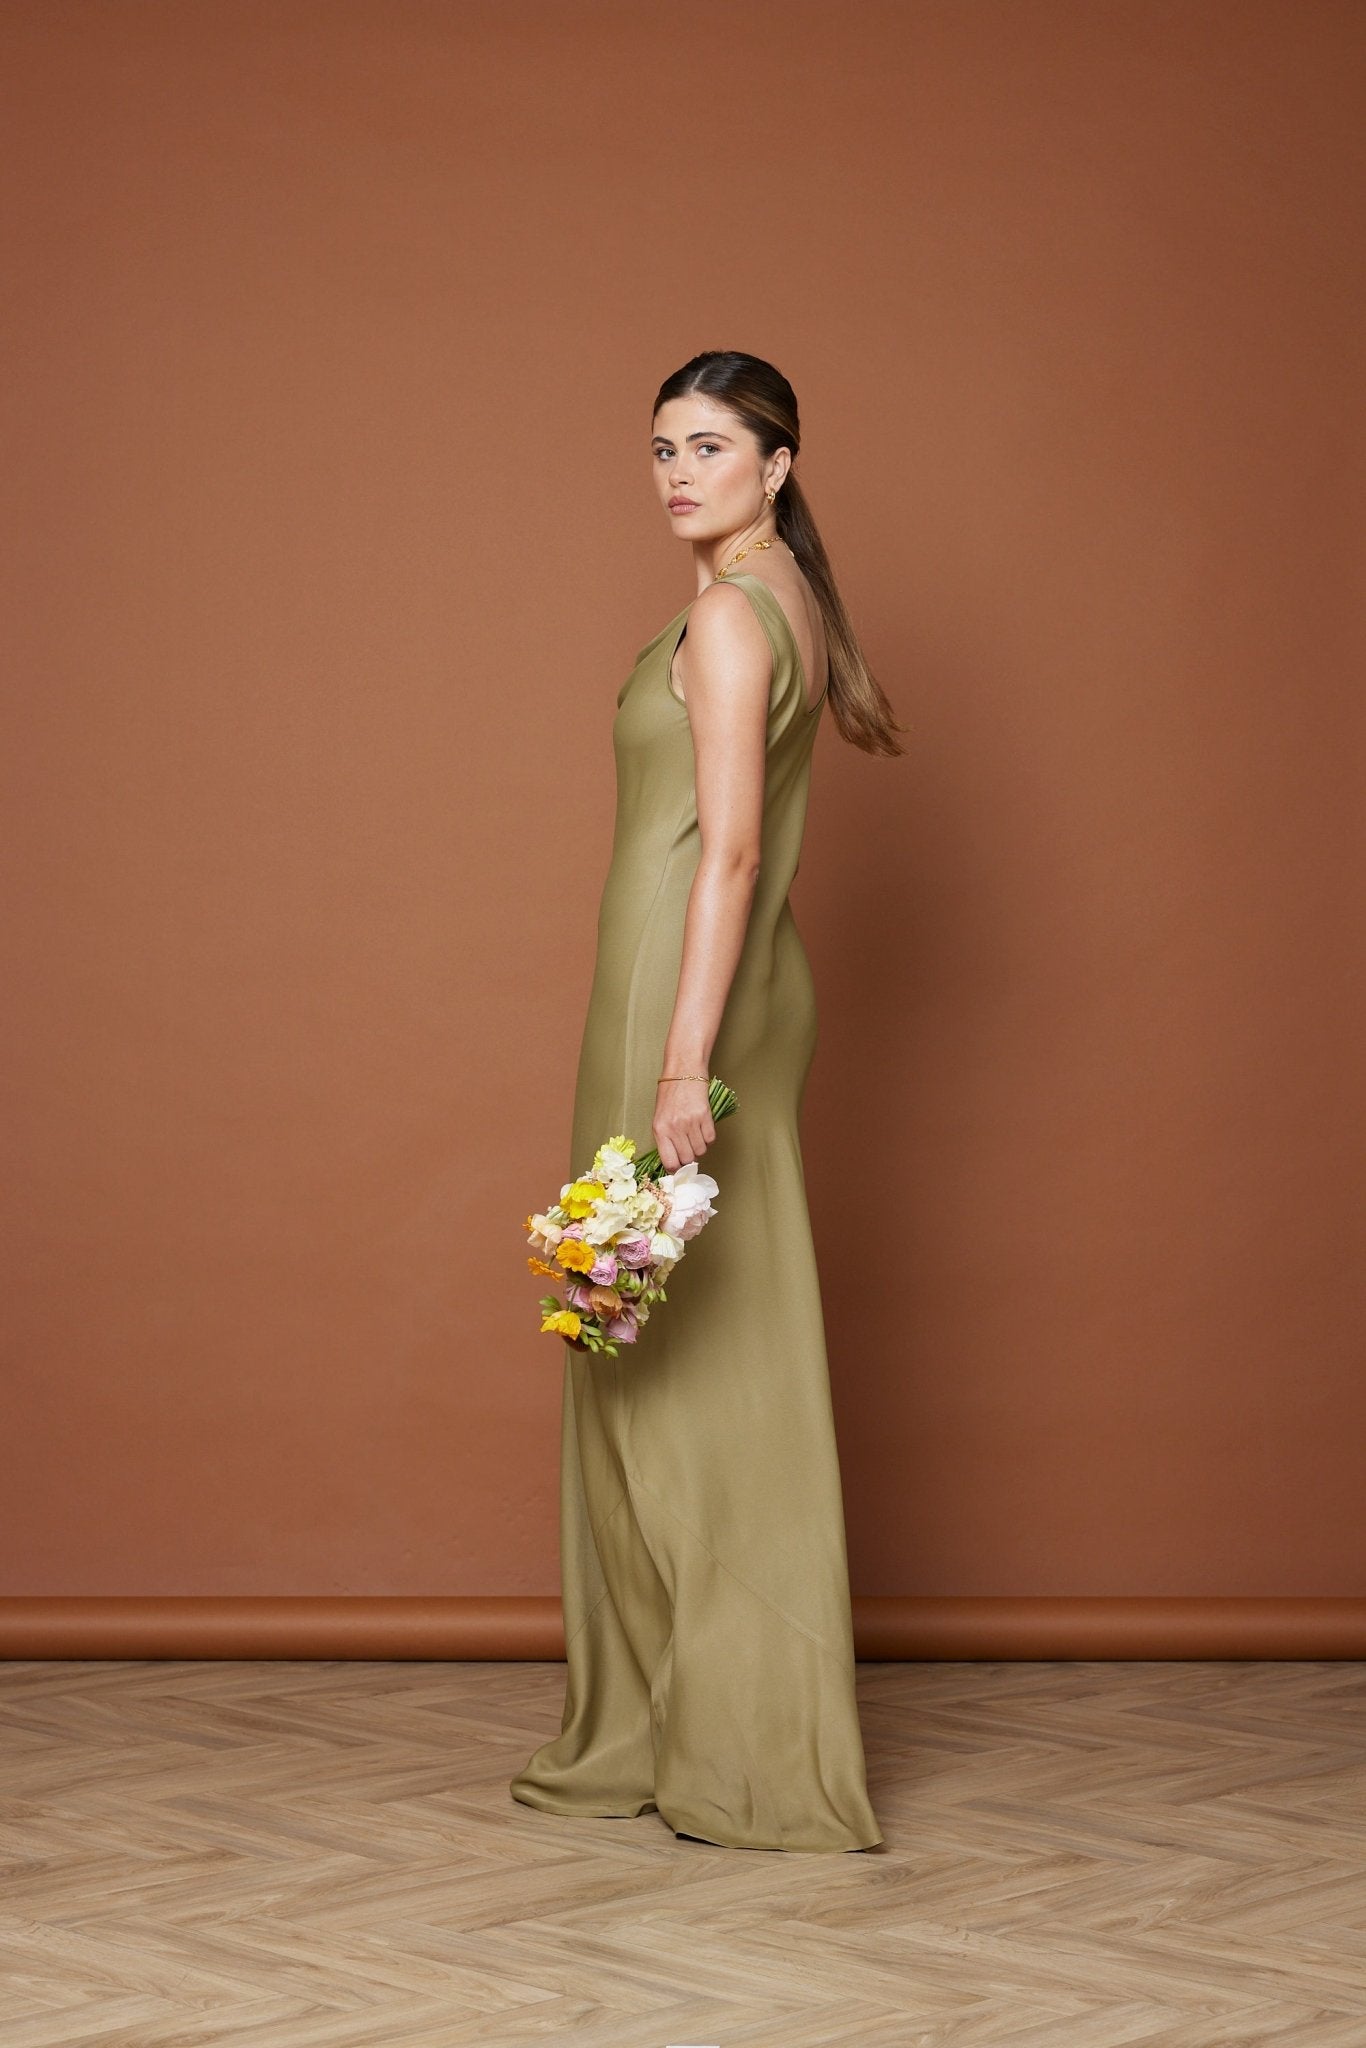 Pandy Satin Cowl Dress - Olive Green NEW - Maids to Measure